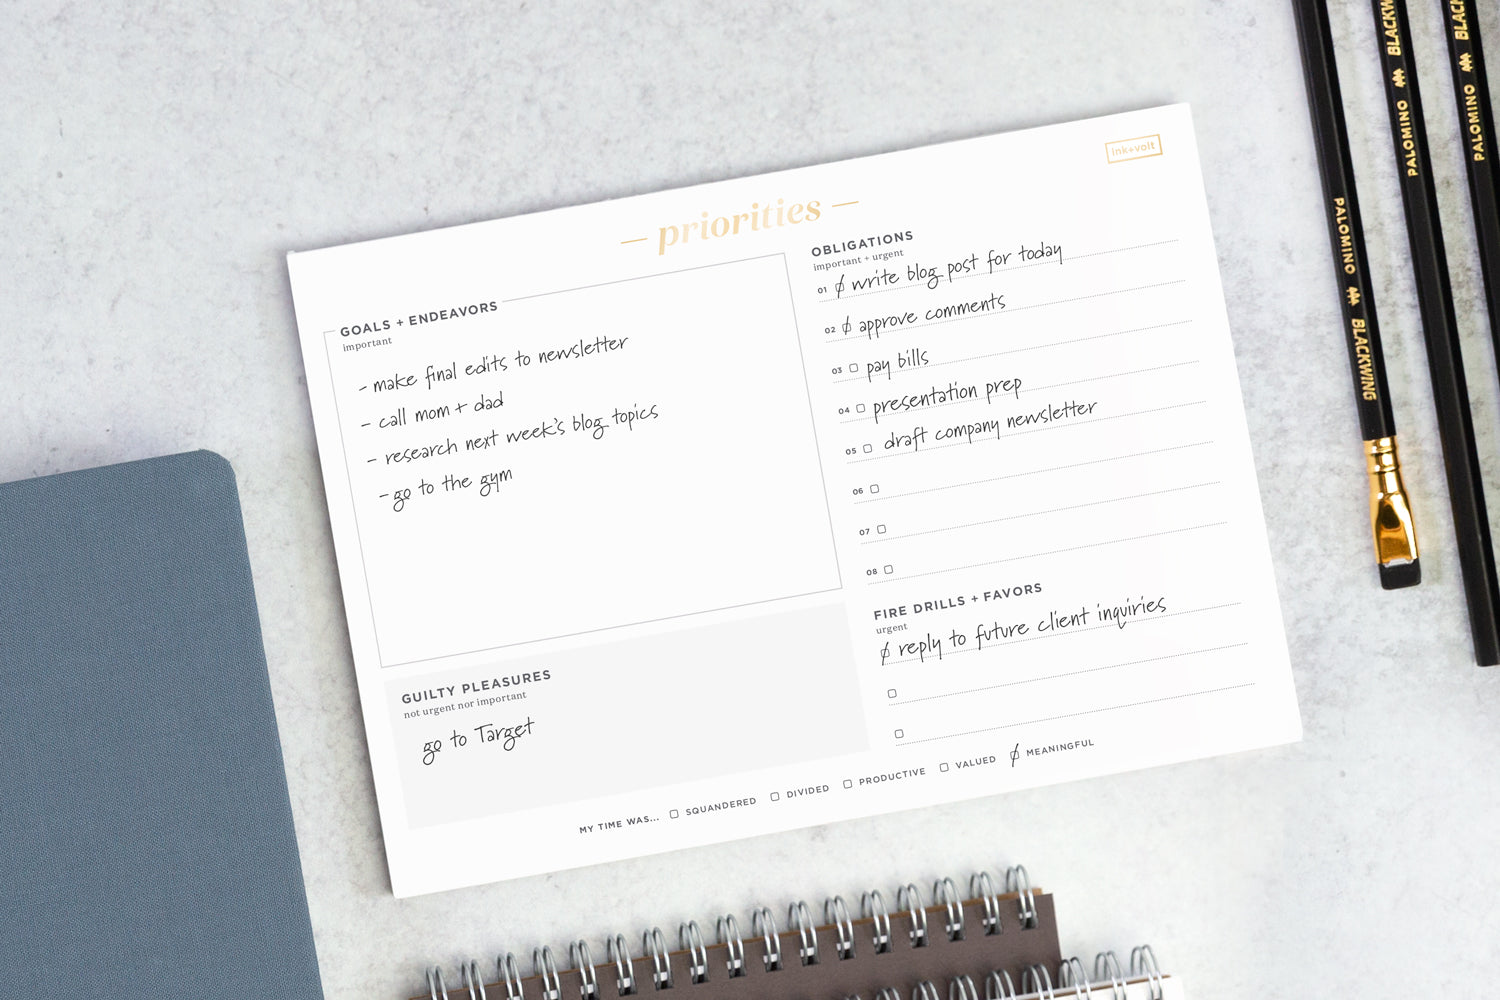 A priority notepad filled out with to-do items